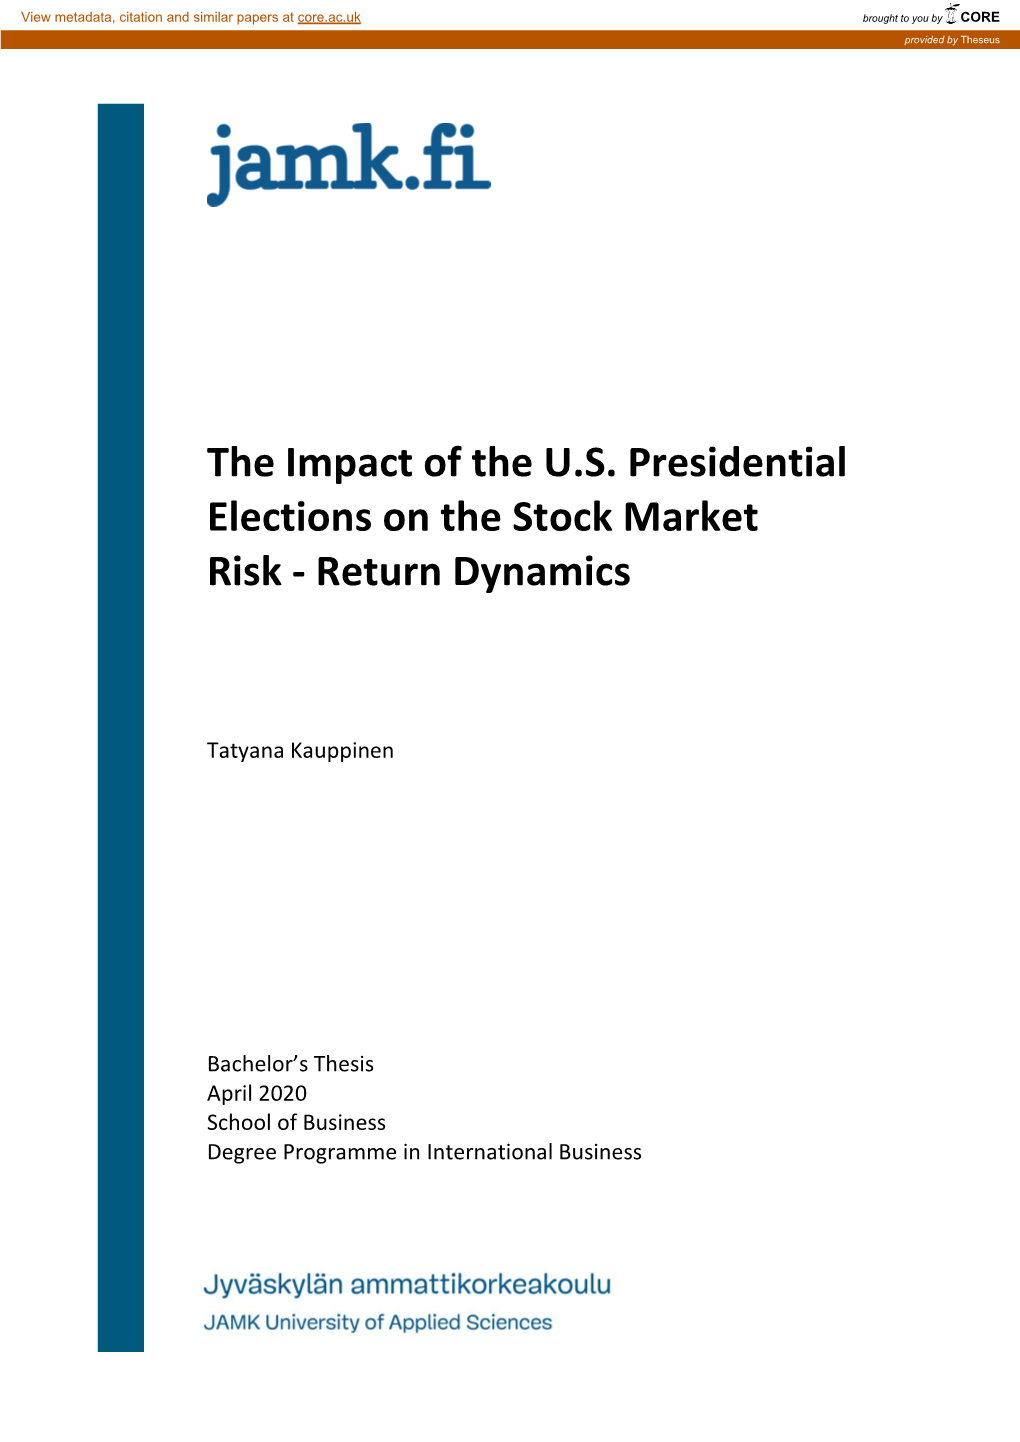 The Impact of the US Presidential Elections on the Stock